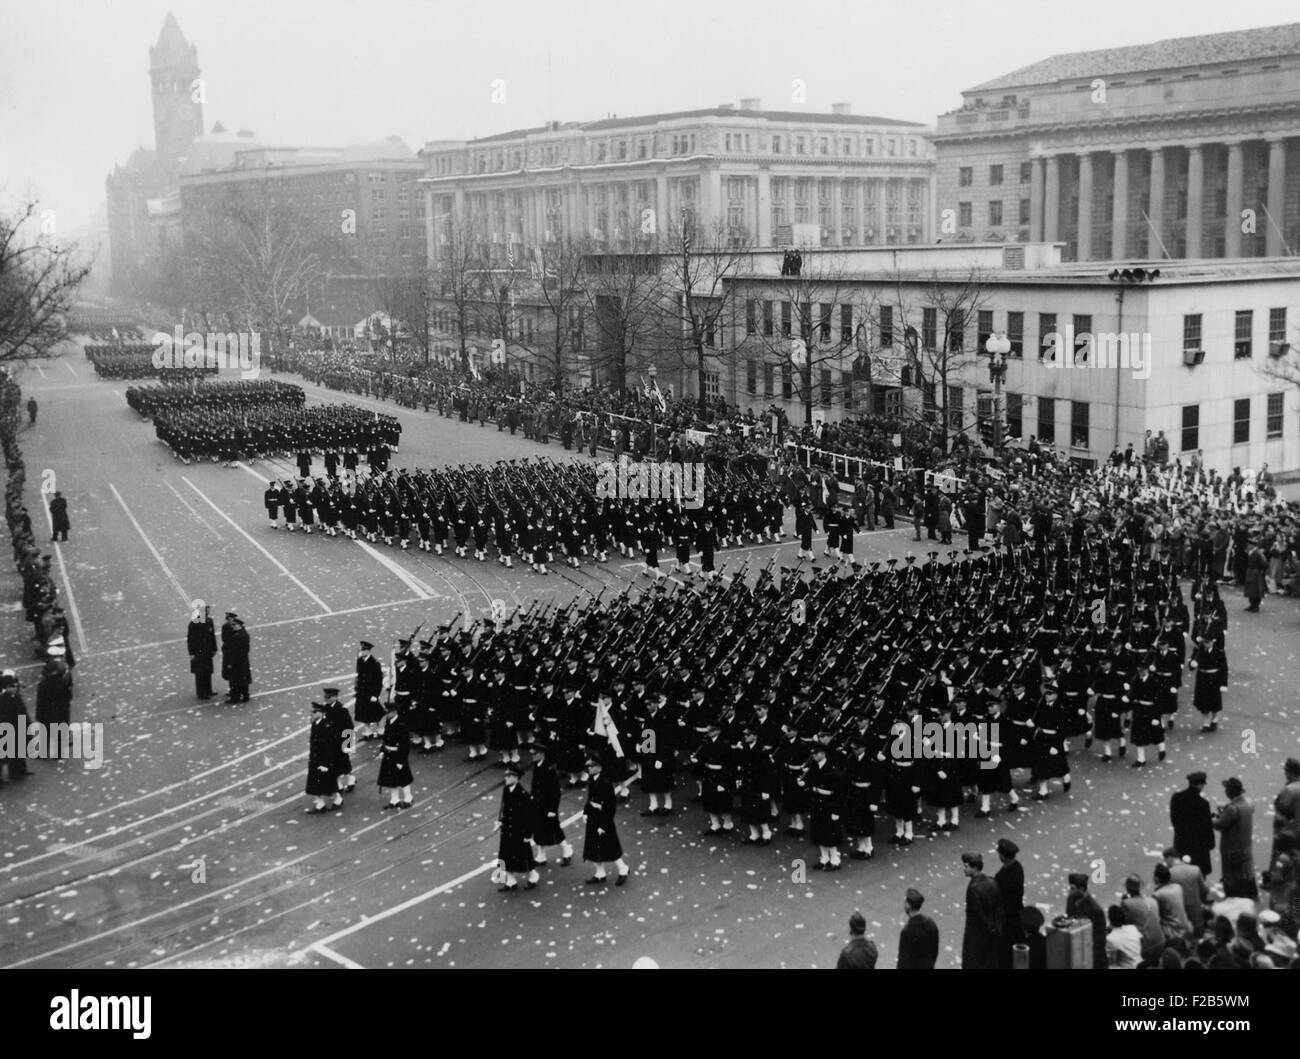 Cadets from the U.S. Navel Academy marching in Eisenhower's Inaugural Parade on Pennsylvania Avenue. Jan. 20, 1953. - (BSLOC 2014 16 28) Stock Photo